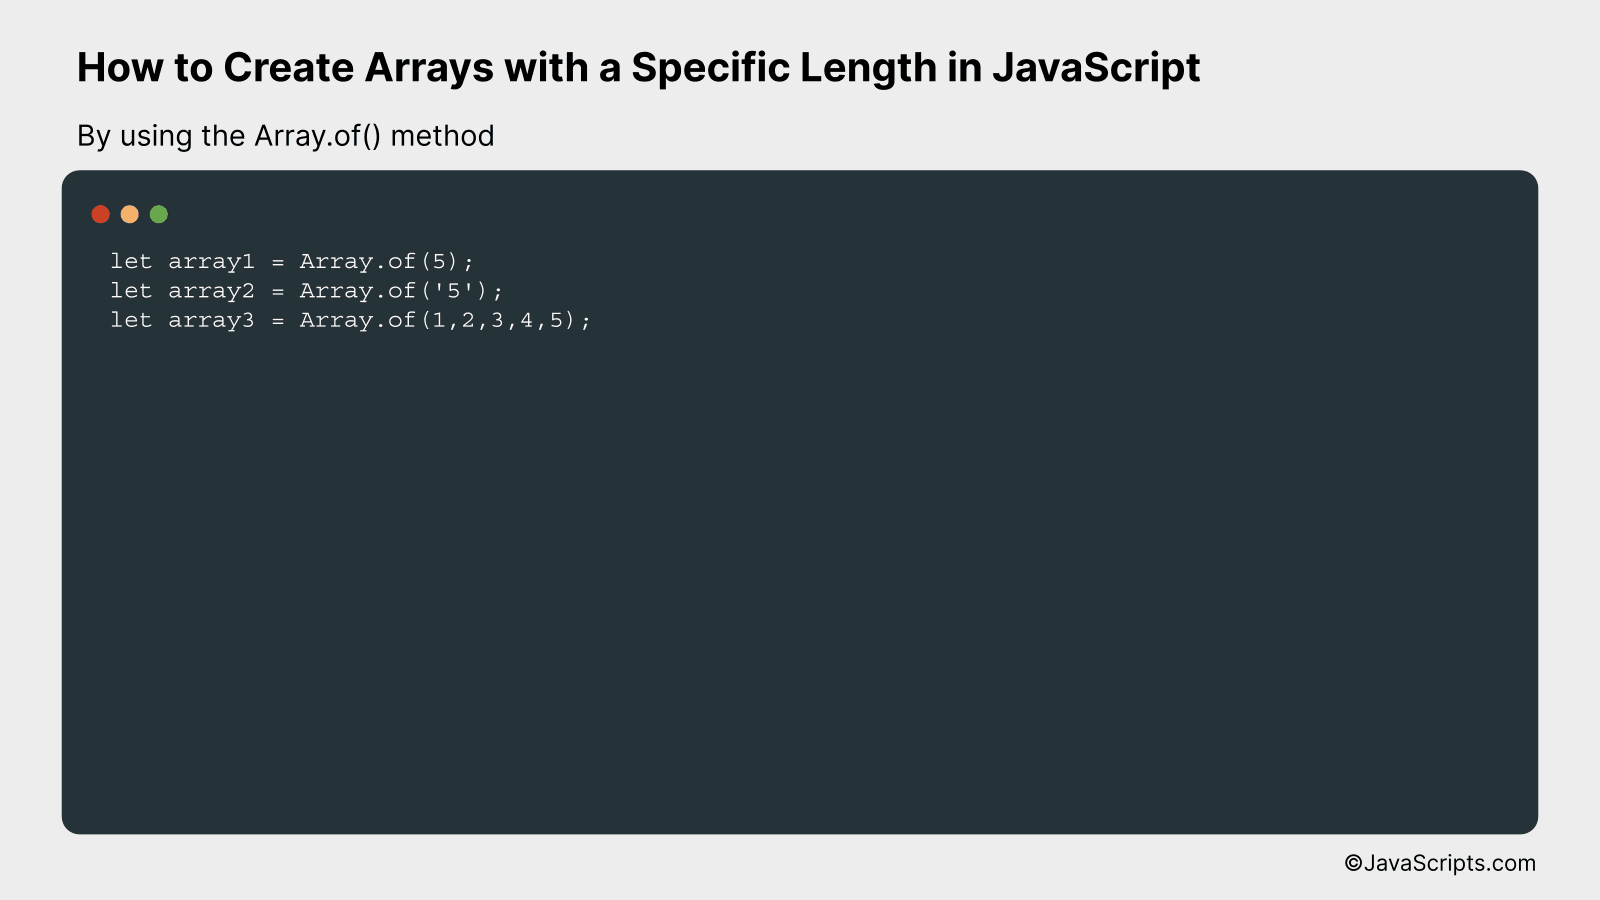 By using the Array.of() method